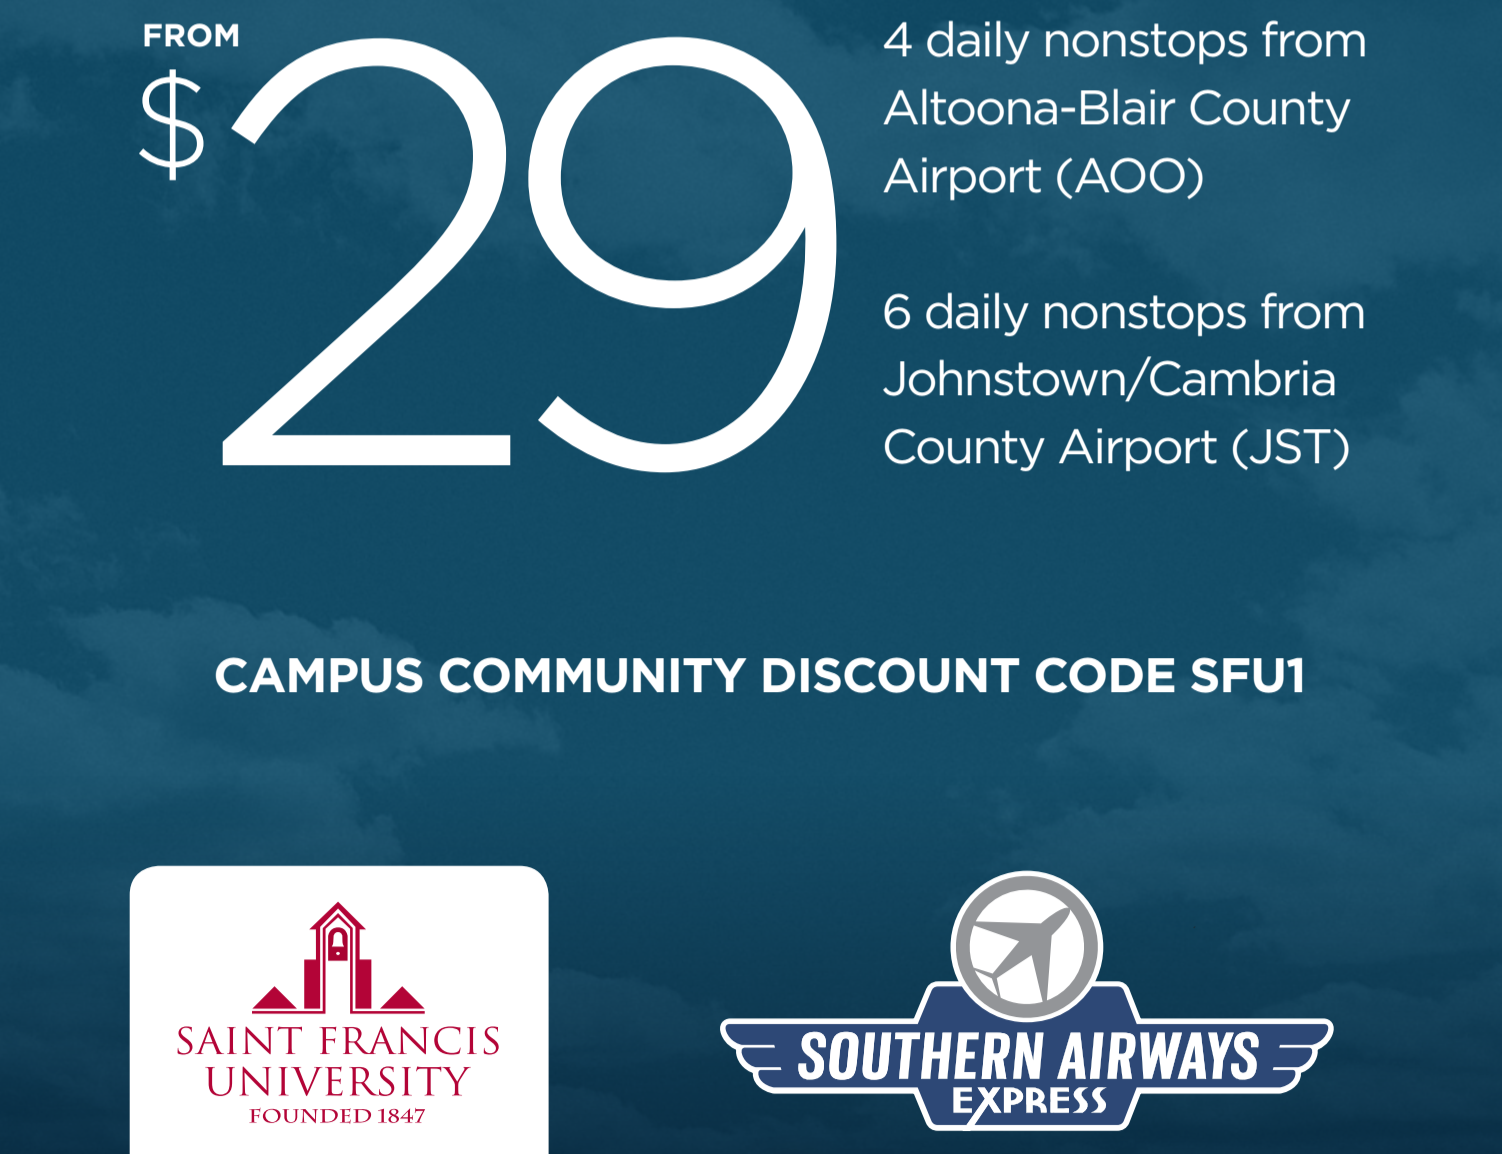 southern airways 2017 offer